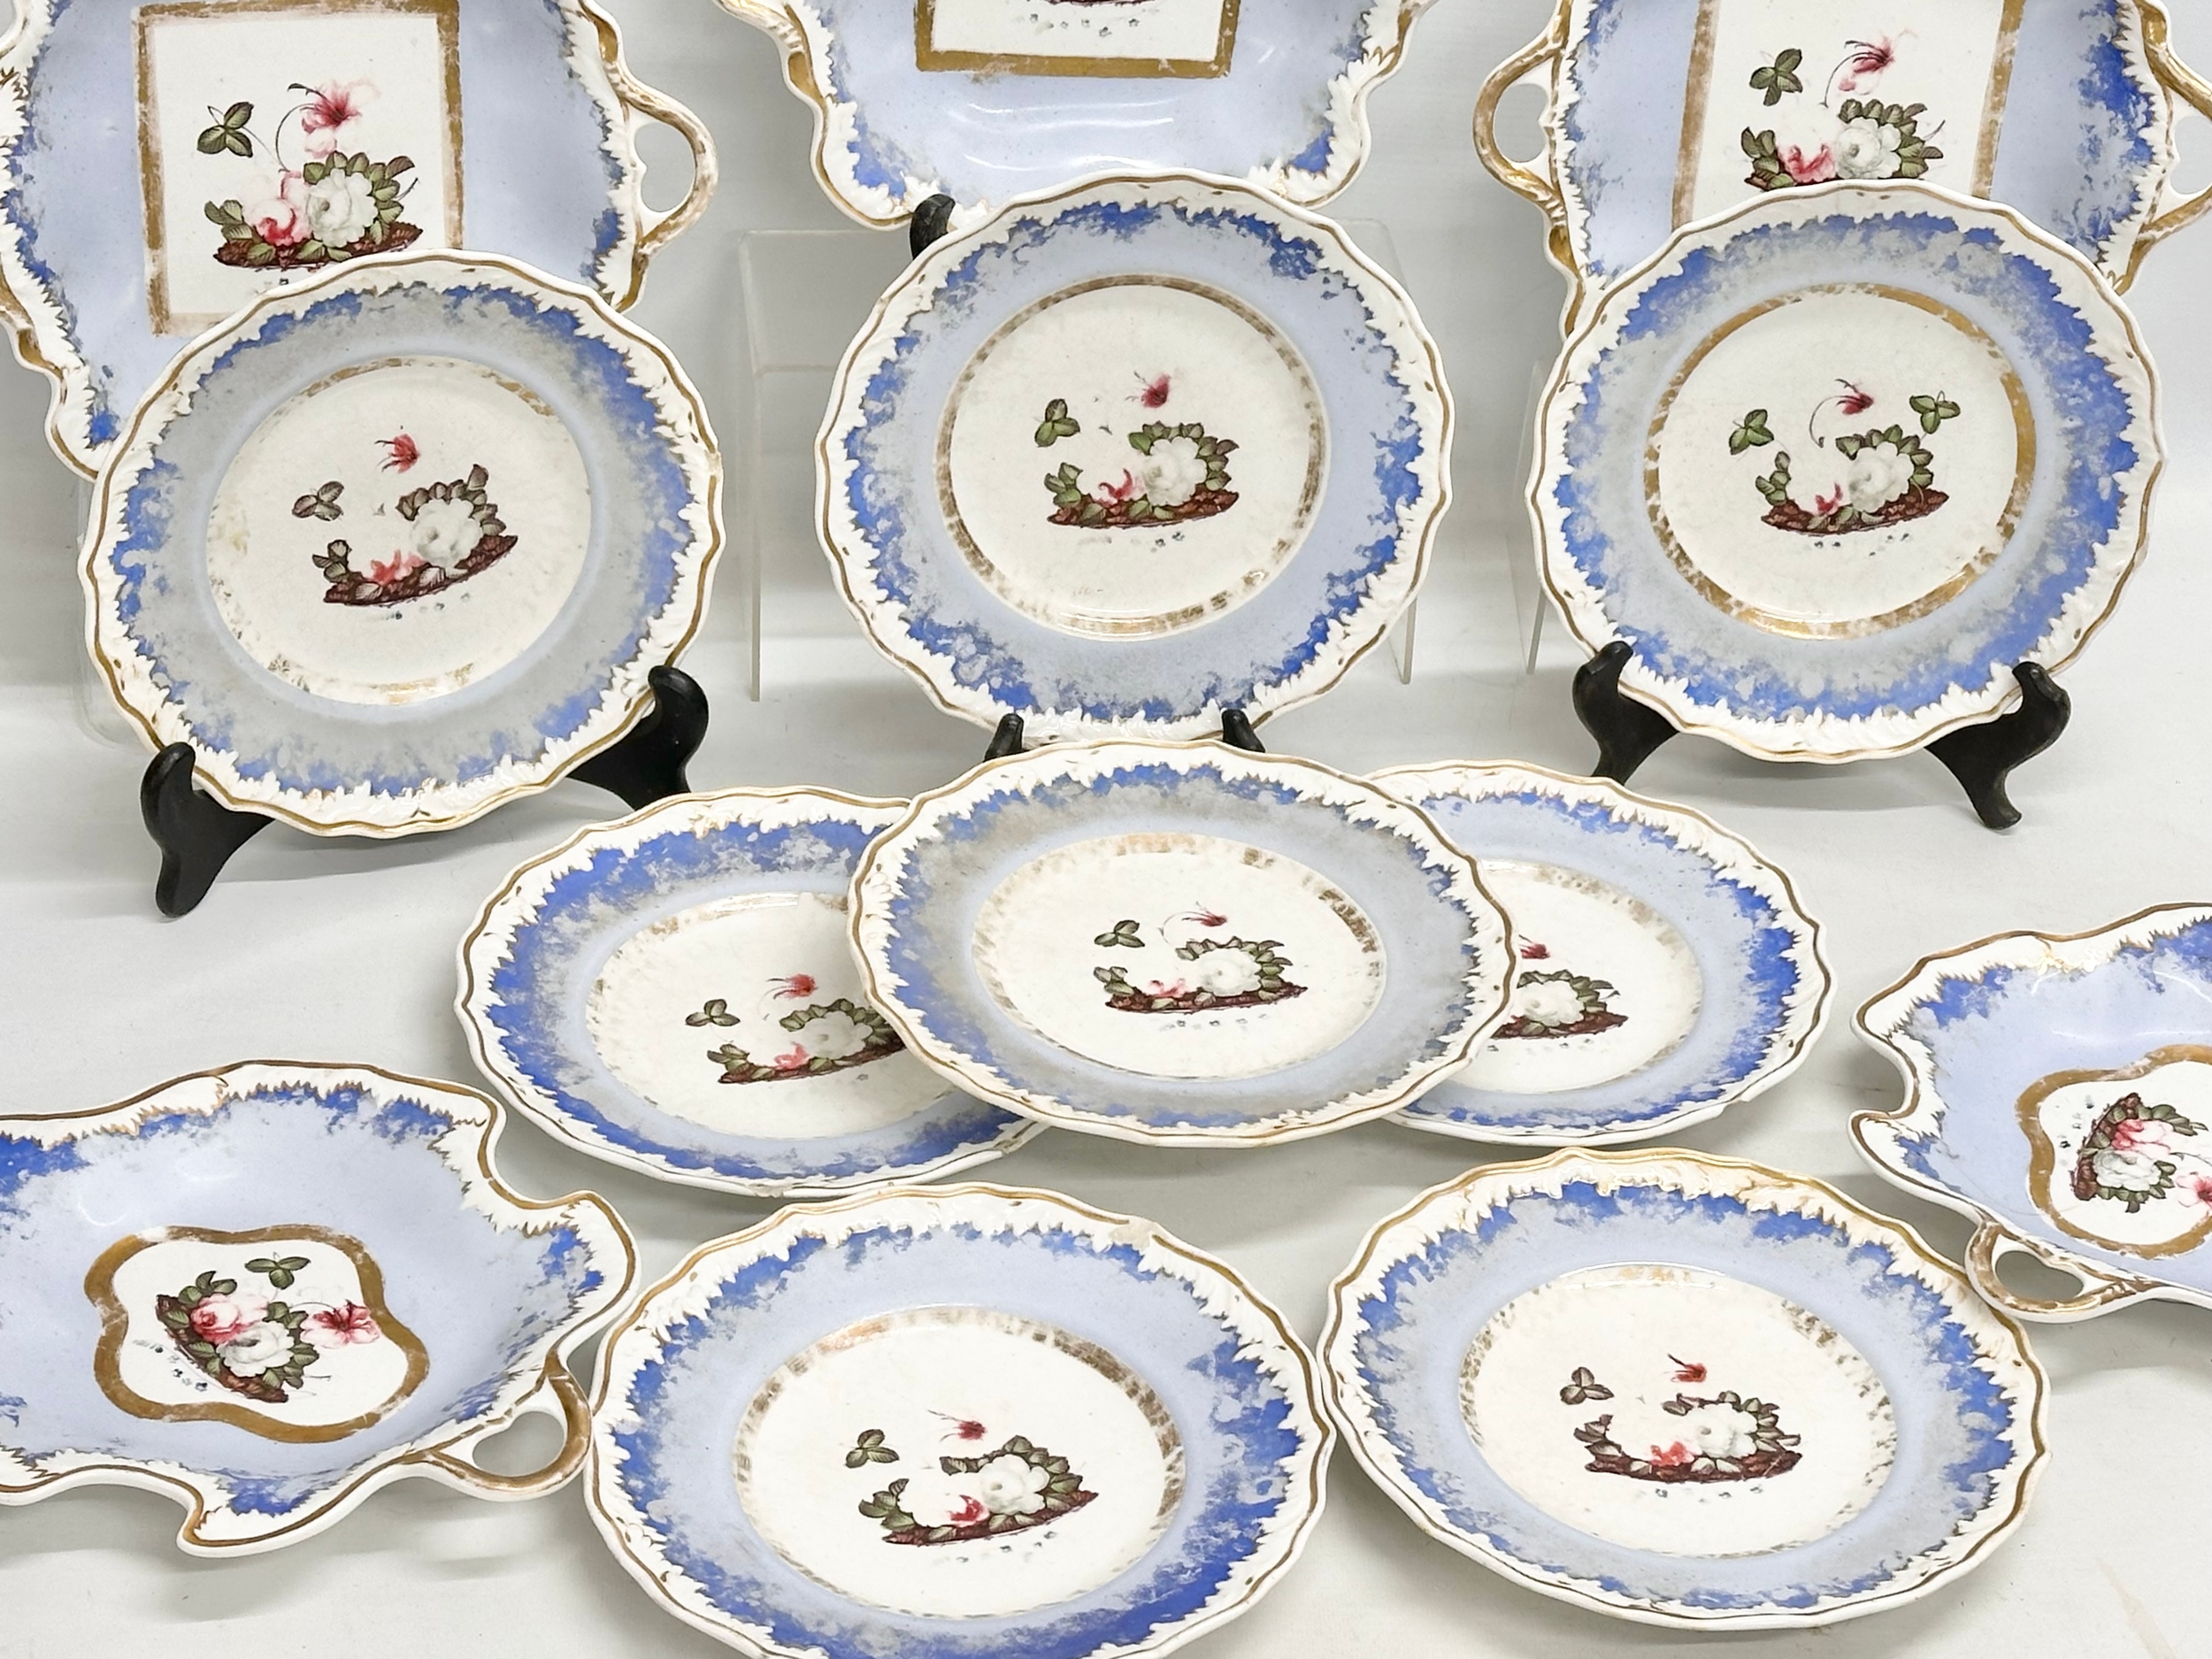 An early 19th century Samuel Alcock ‘Periwinkle’ part dinner service. Circa 1822-1830. - Image 3 of 15